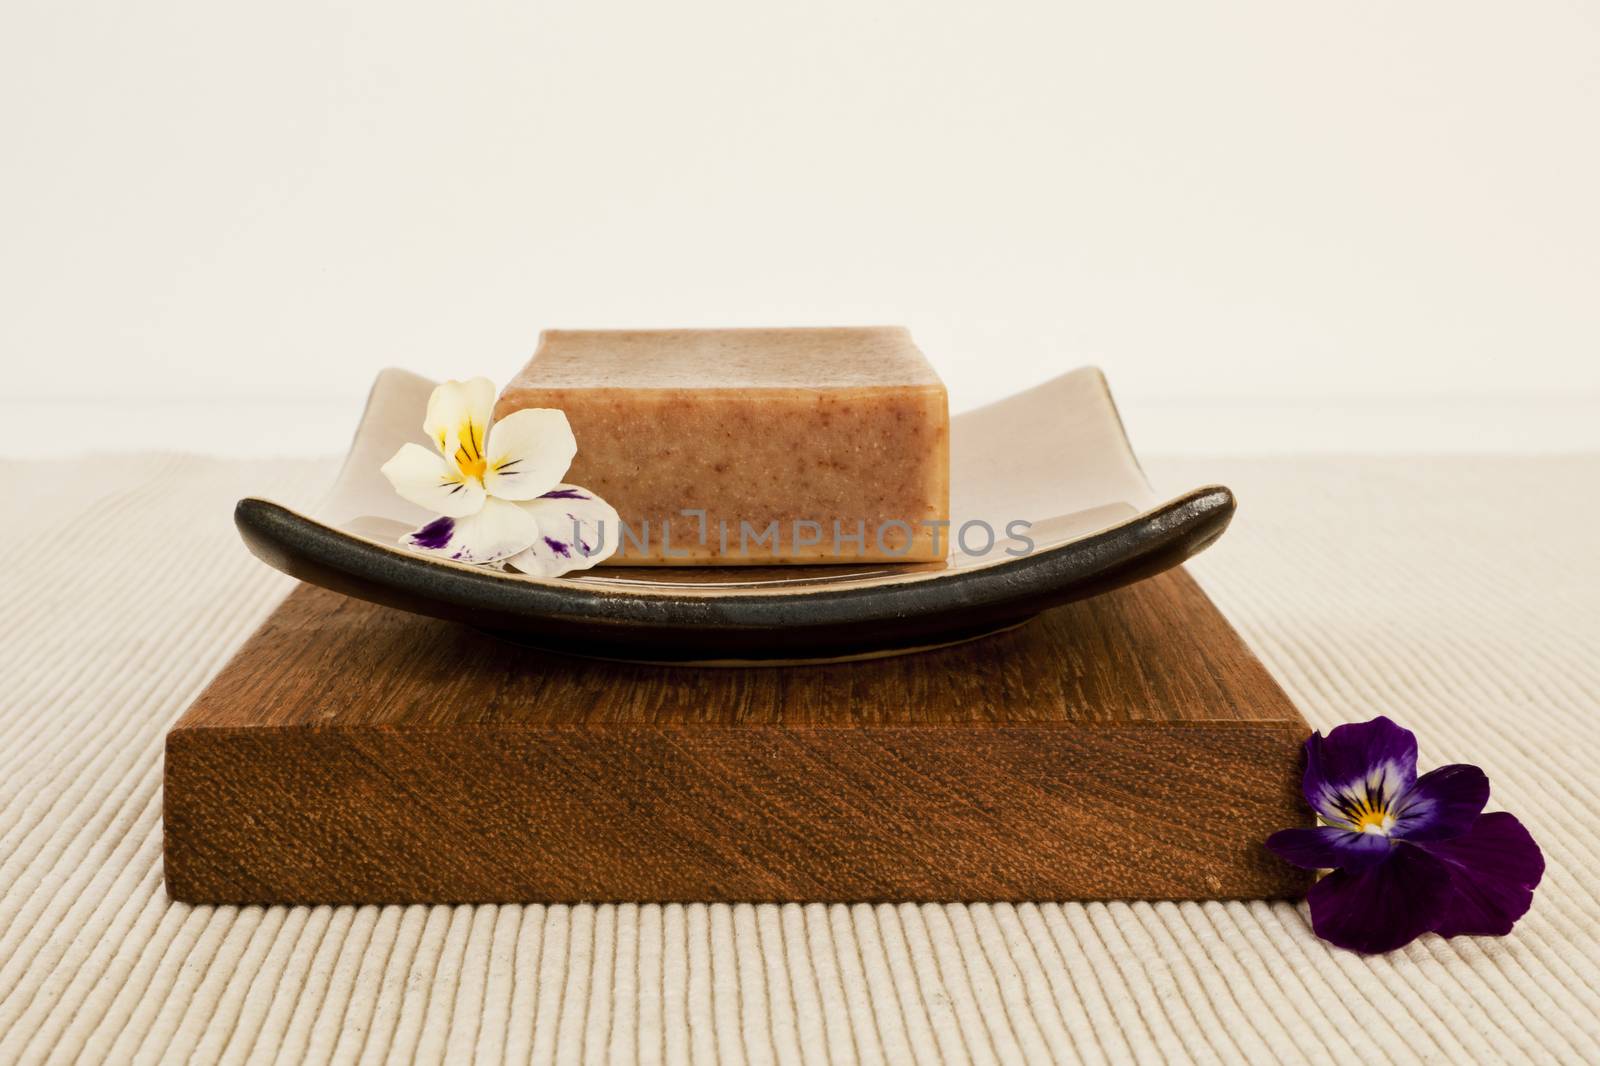 Spa still life with organic soap bar, flower blossom on a beautifull ceramics plate on wood.